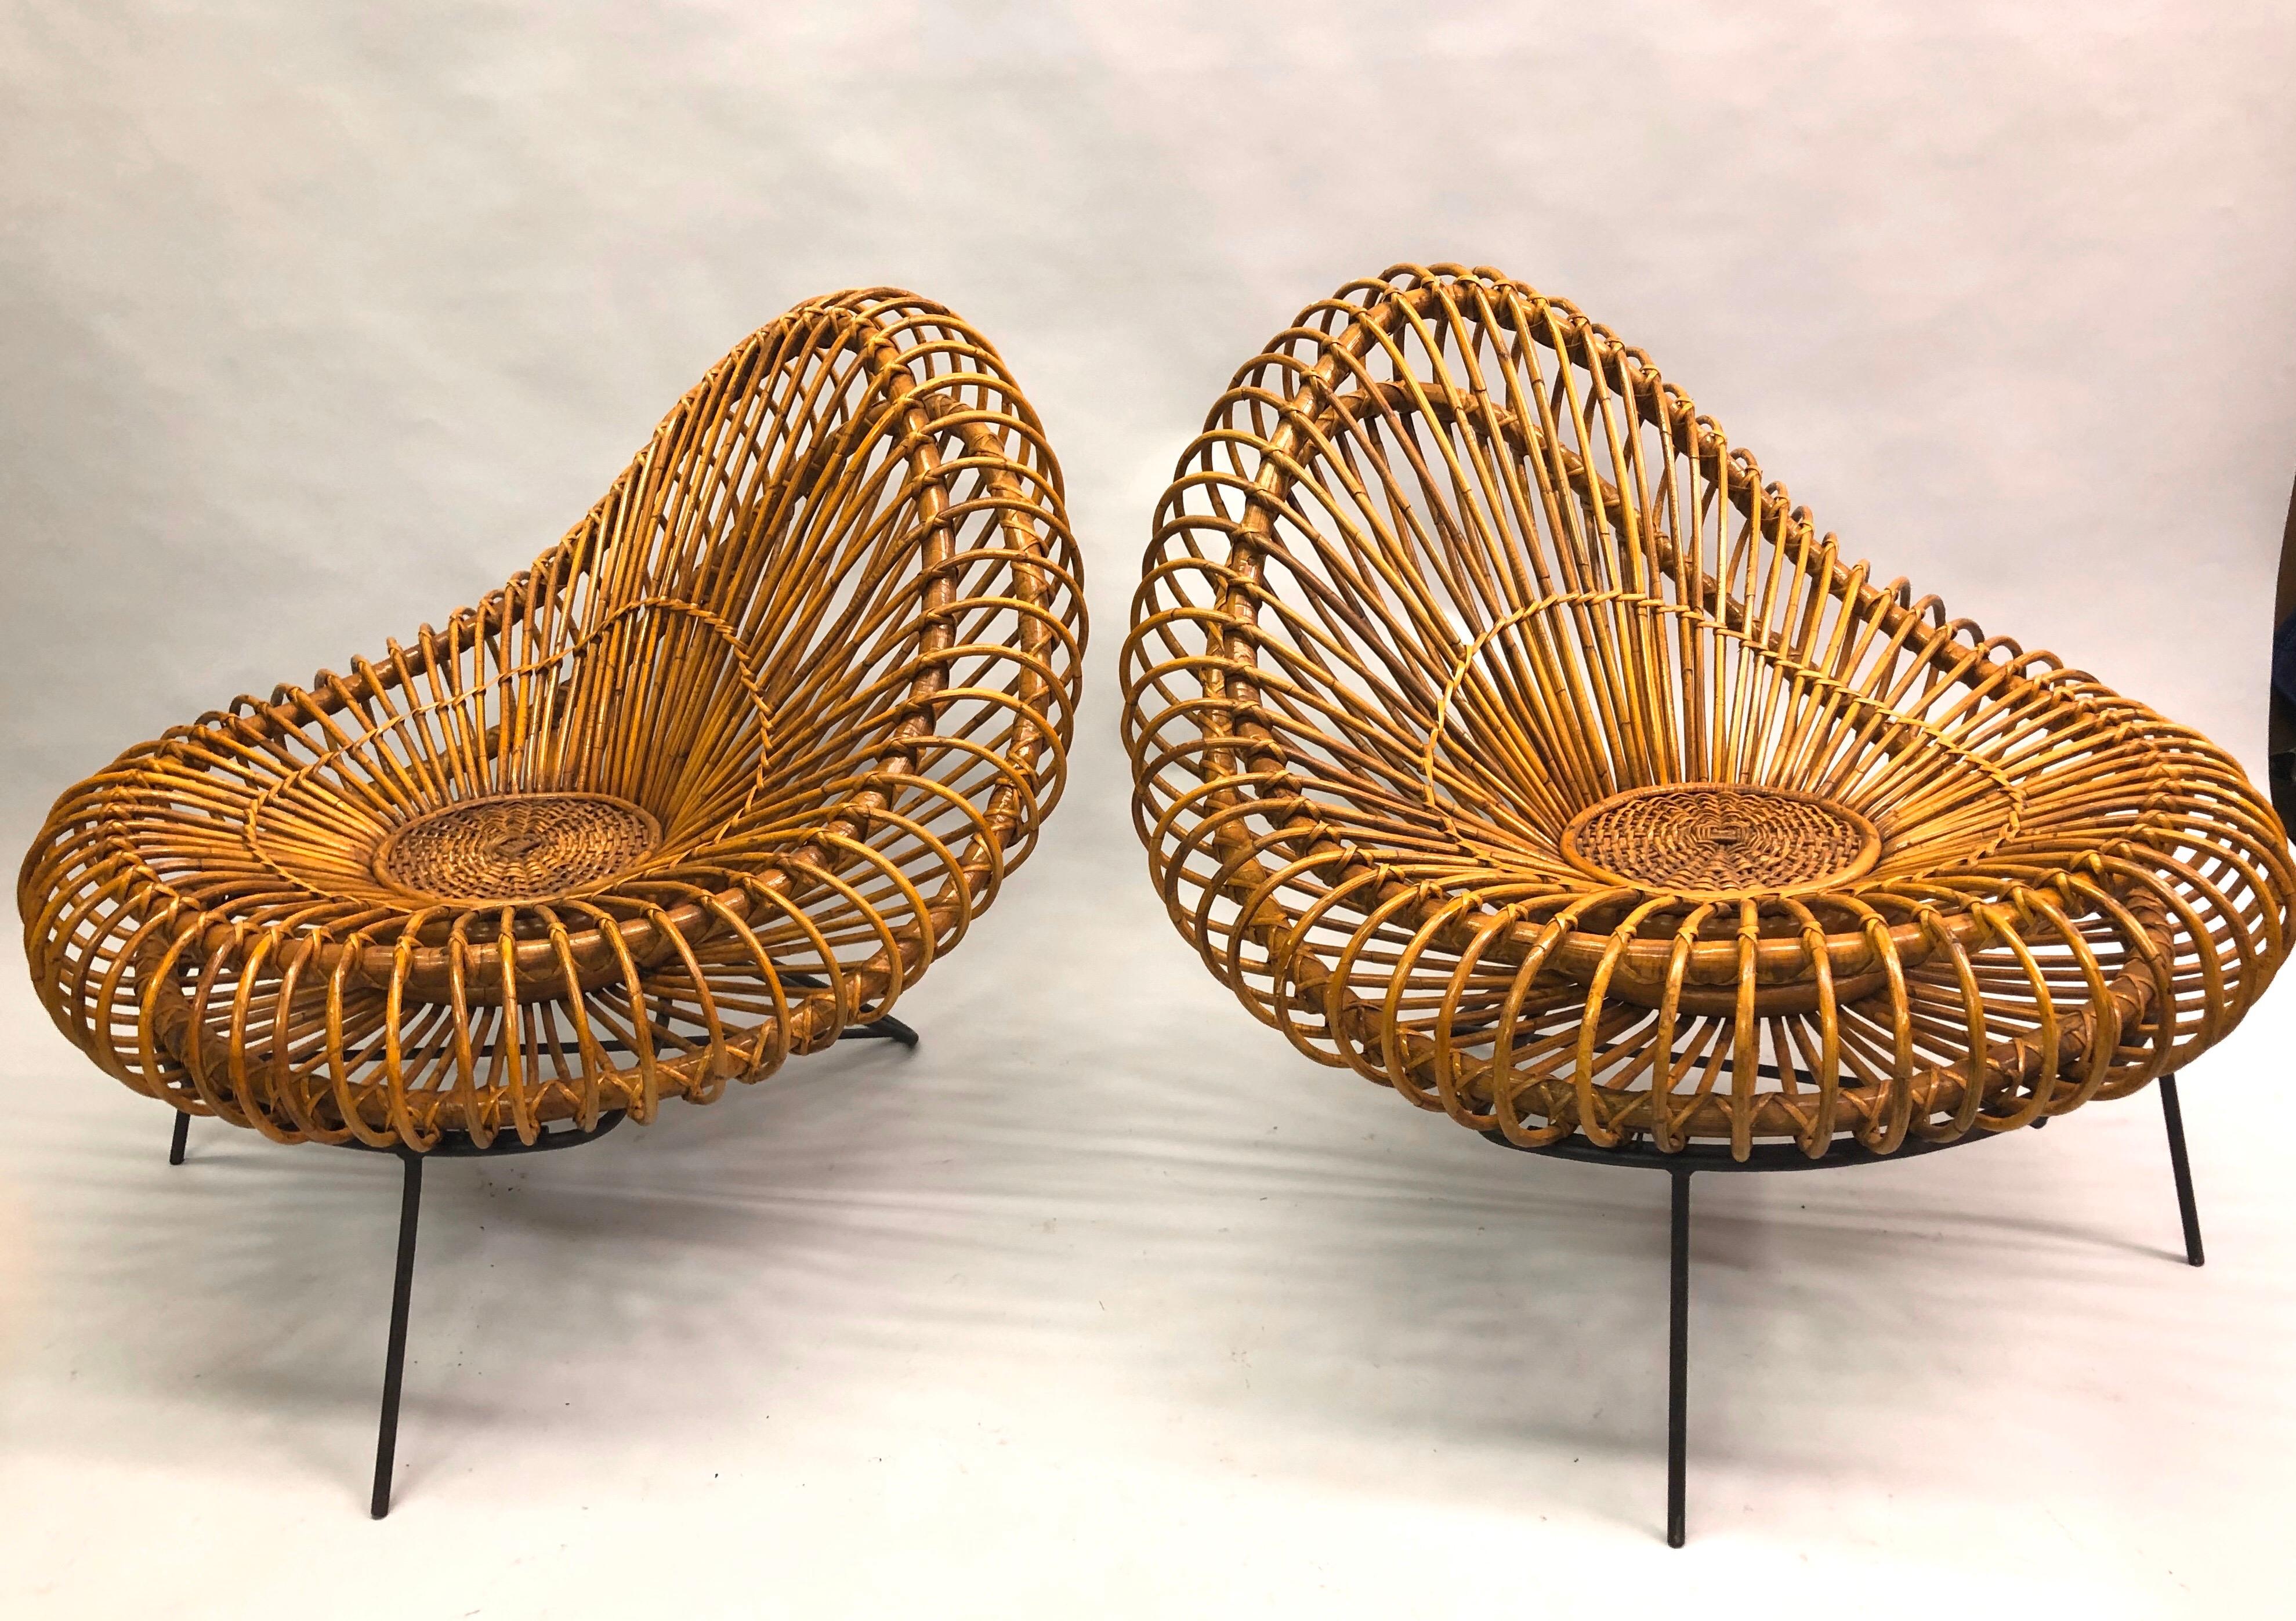 Wicker Pair of French Mid-century Rattan Lounge Chairs by Janine Abraham & Dirk Jan Roi